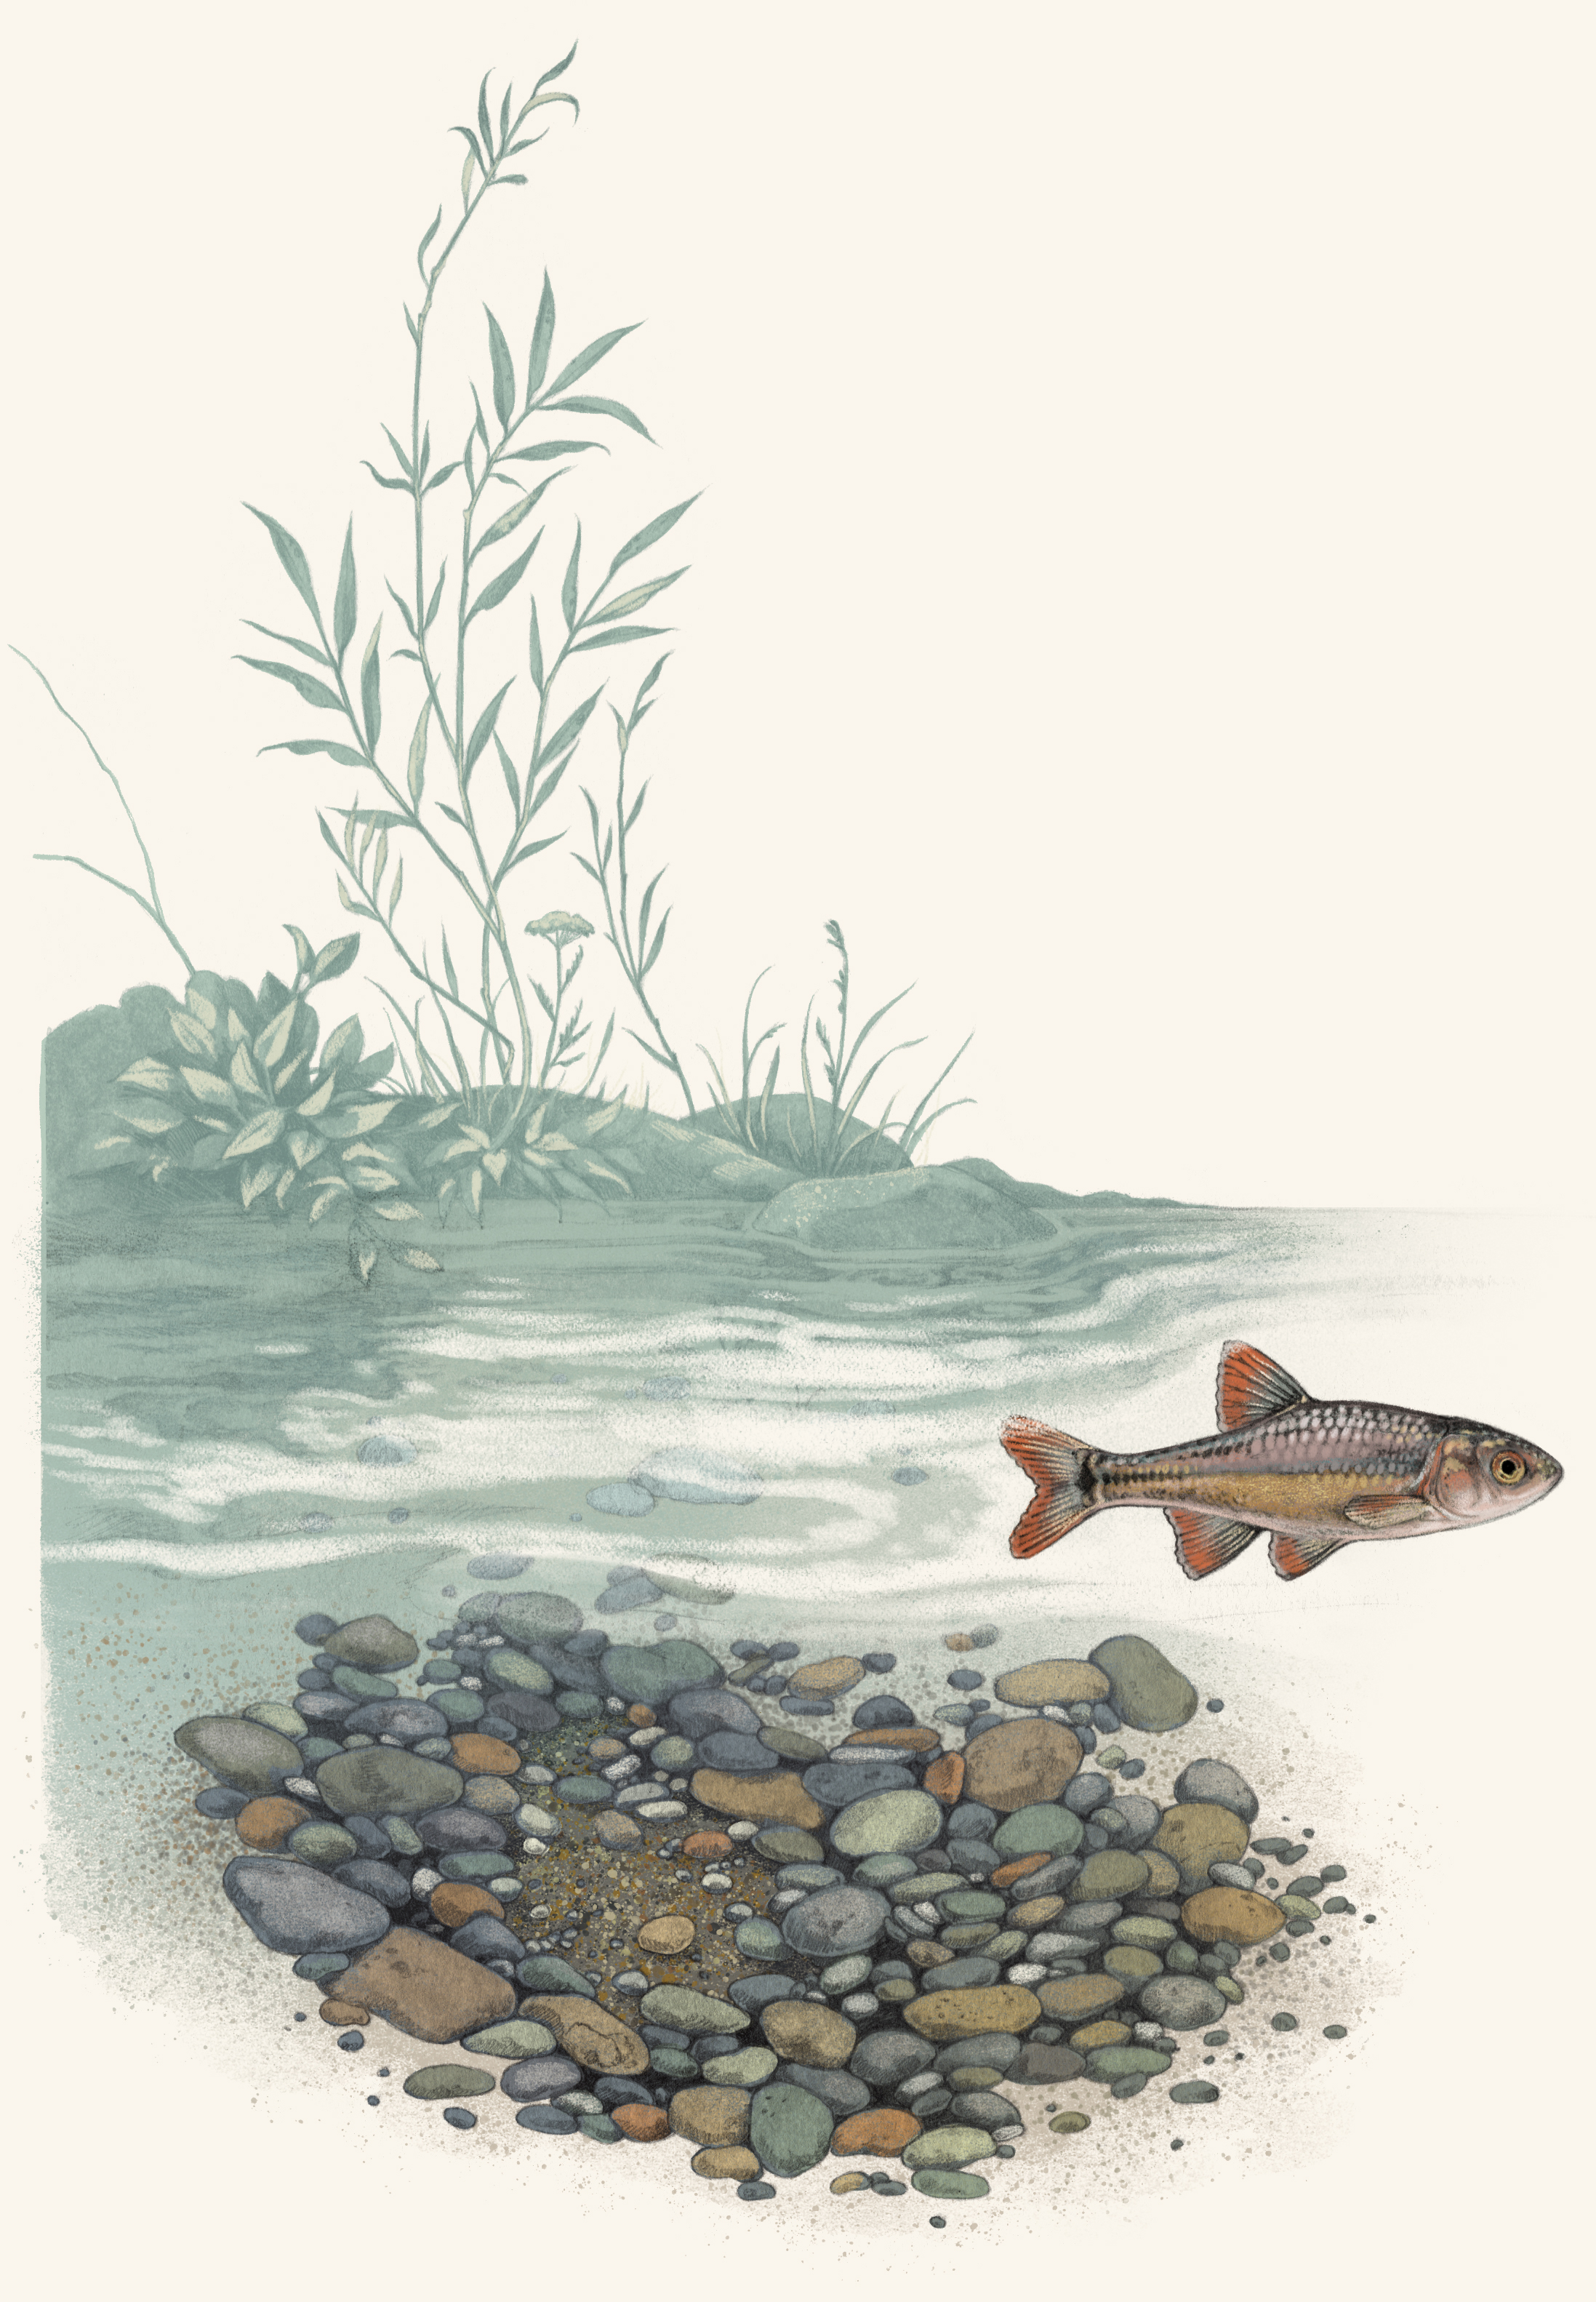 an illustration of a fish swimming in a pool of water with a willow in the background and pebbles underneath.